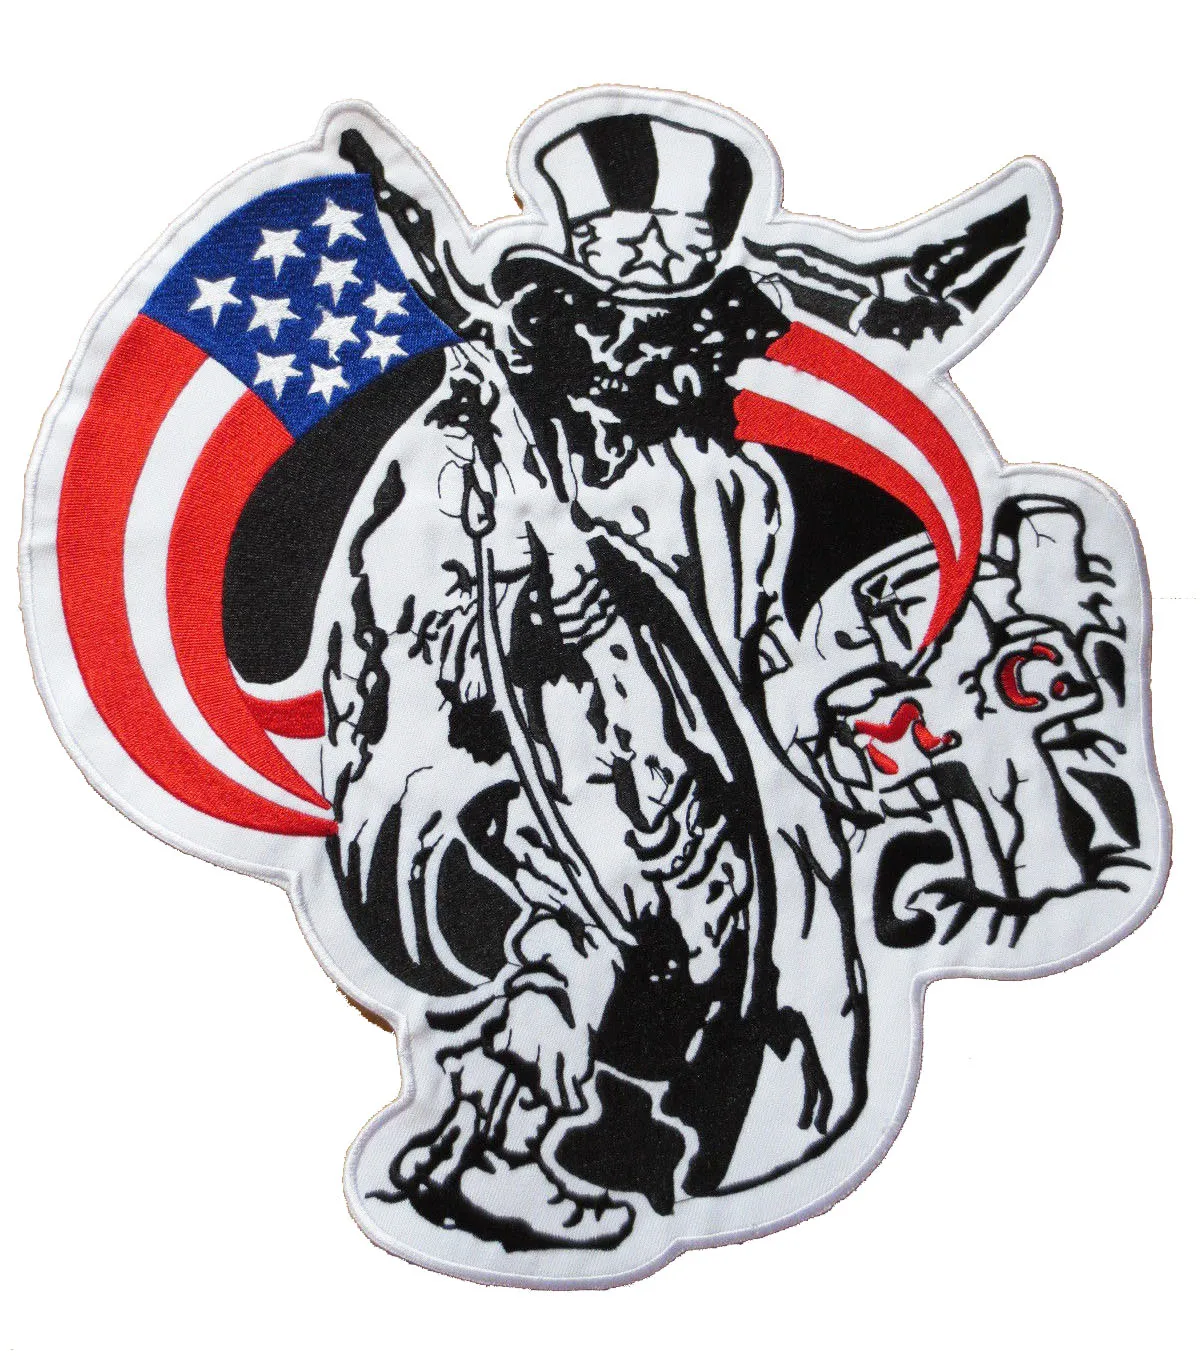 Huge Size 12'' inches large Embroidery Patches USA Hat flags for Jacket Back Hot Sale Free Shipping